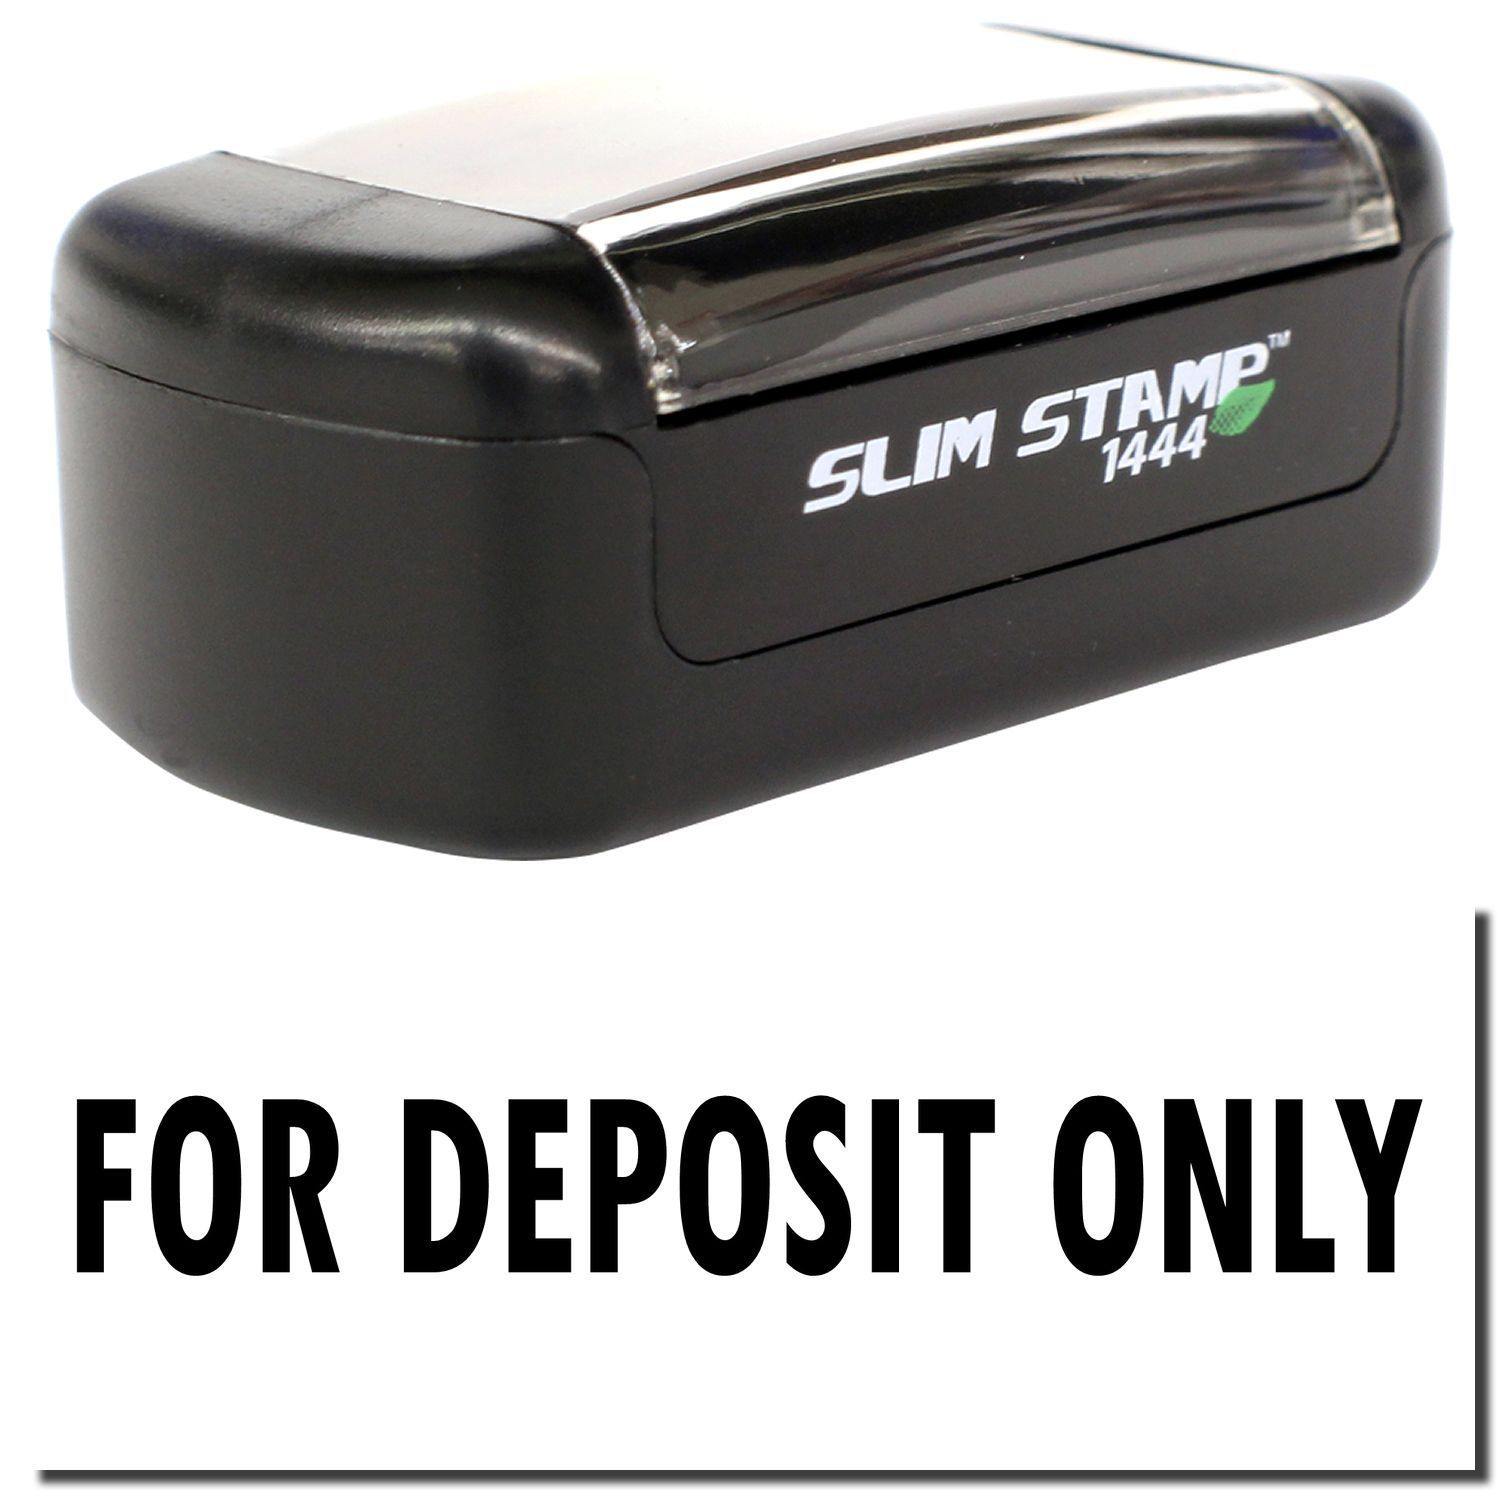 A stock office pre-inked stamp with a stamped image showing how the text "FOR DEPOSIT ONLY" is displayed after stamping.